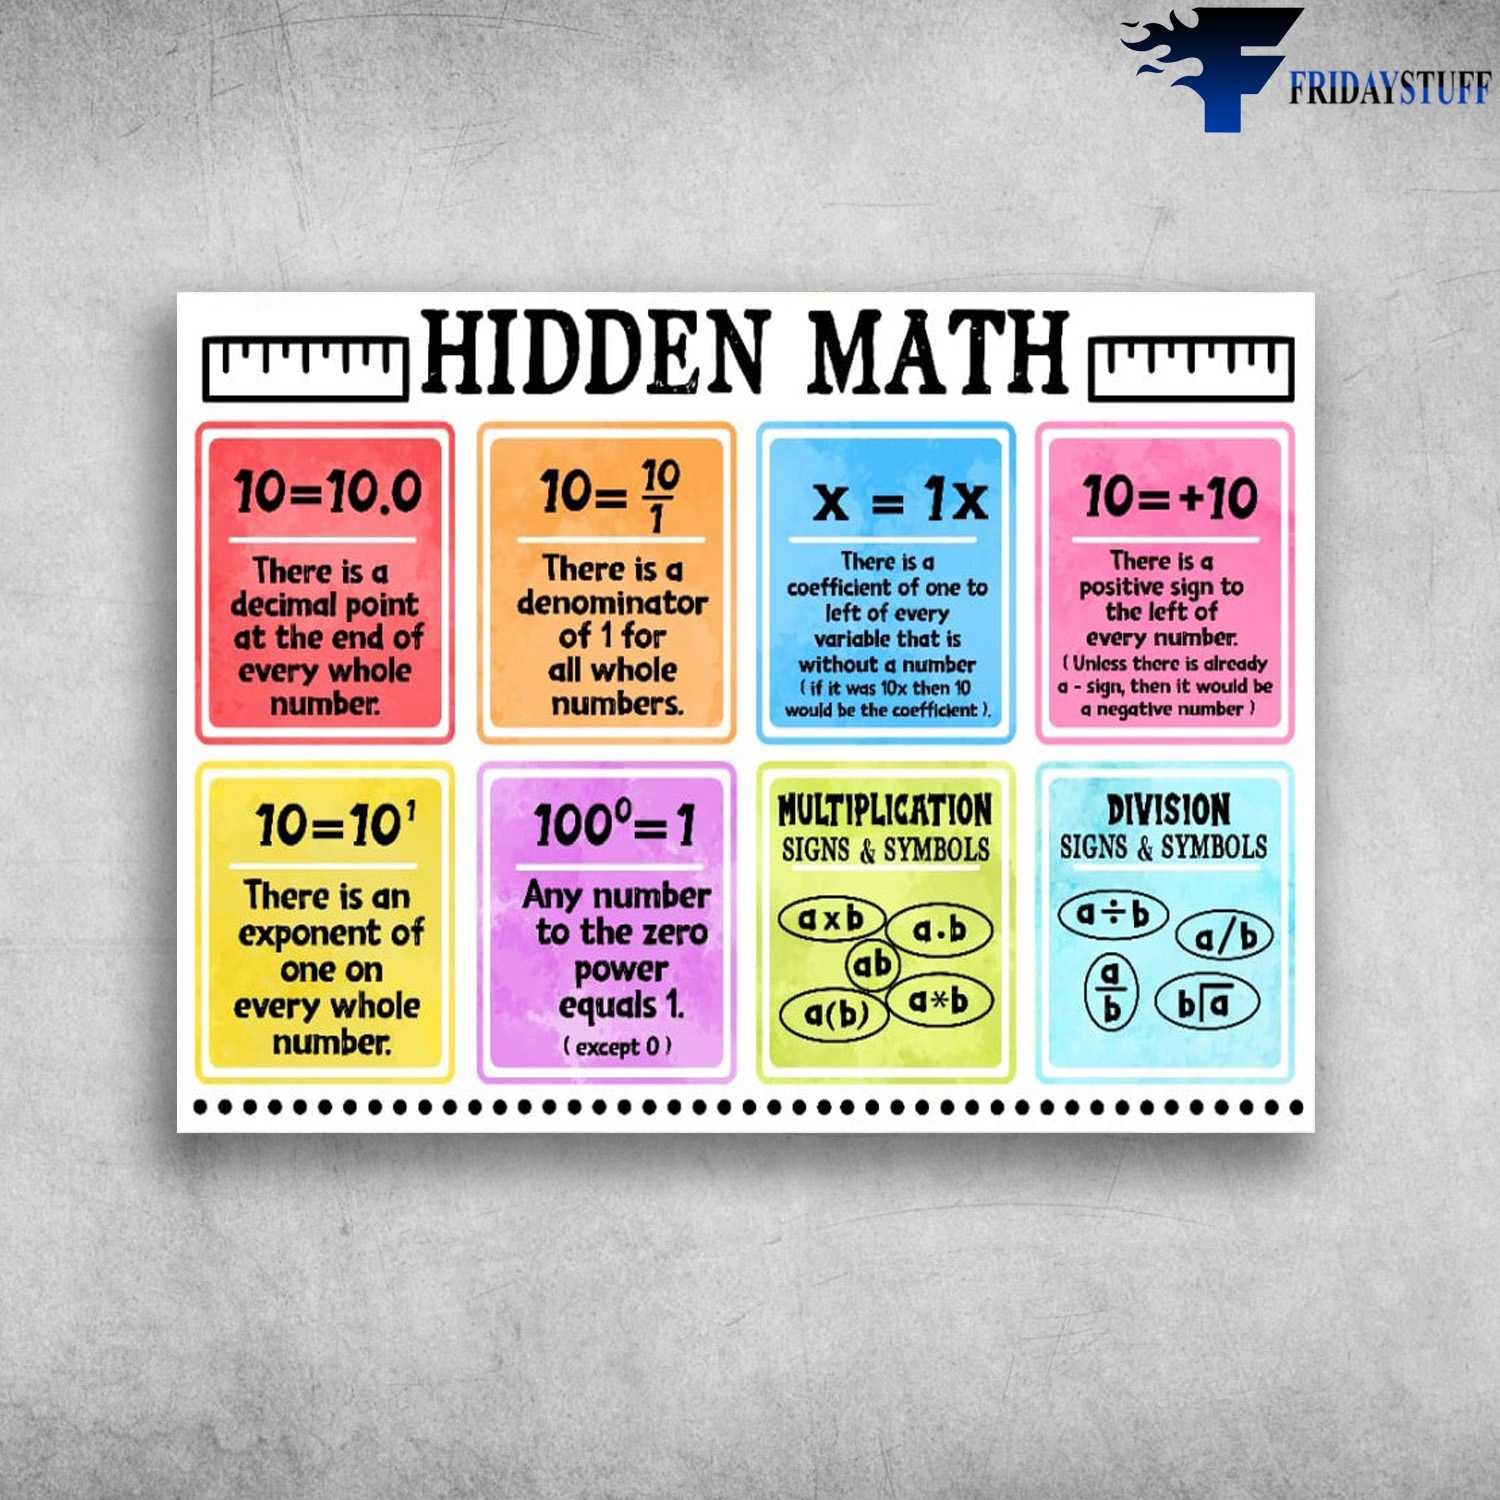 Back To School - Hidden Math, There Is A Decimal Point At The End Of Every Whole Number, There Is A Denominator Of 1 For All Whole Number, Division Signs And Symbols